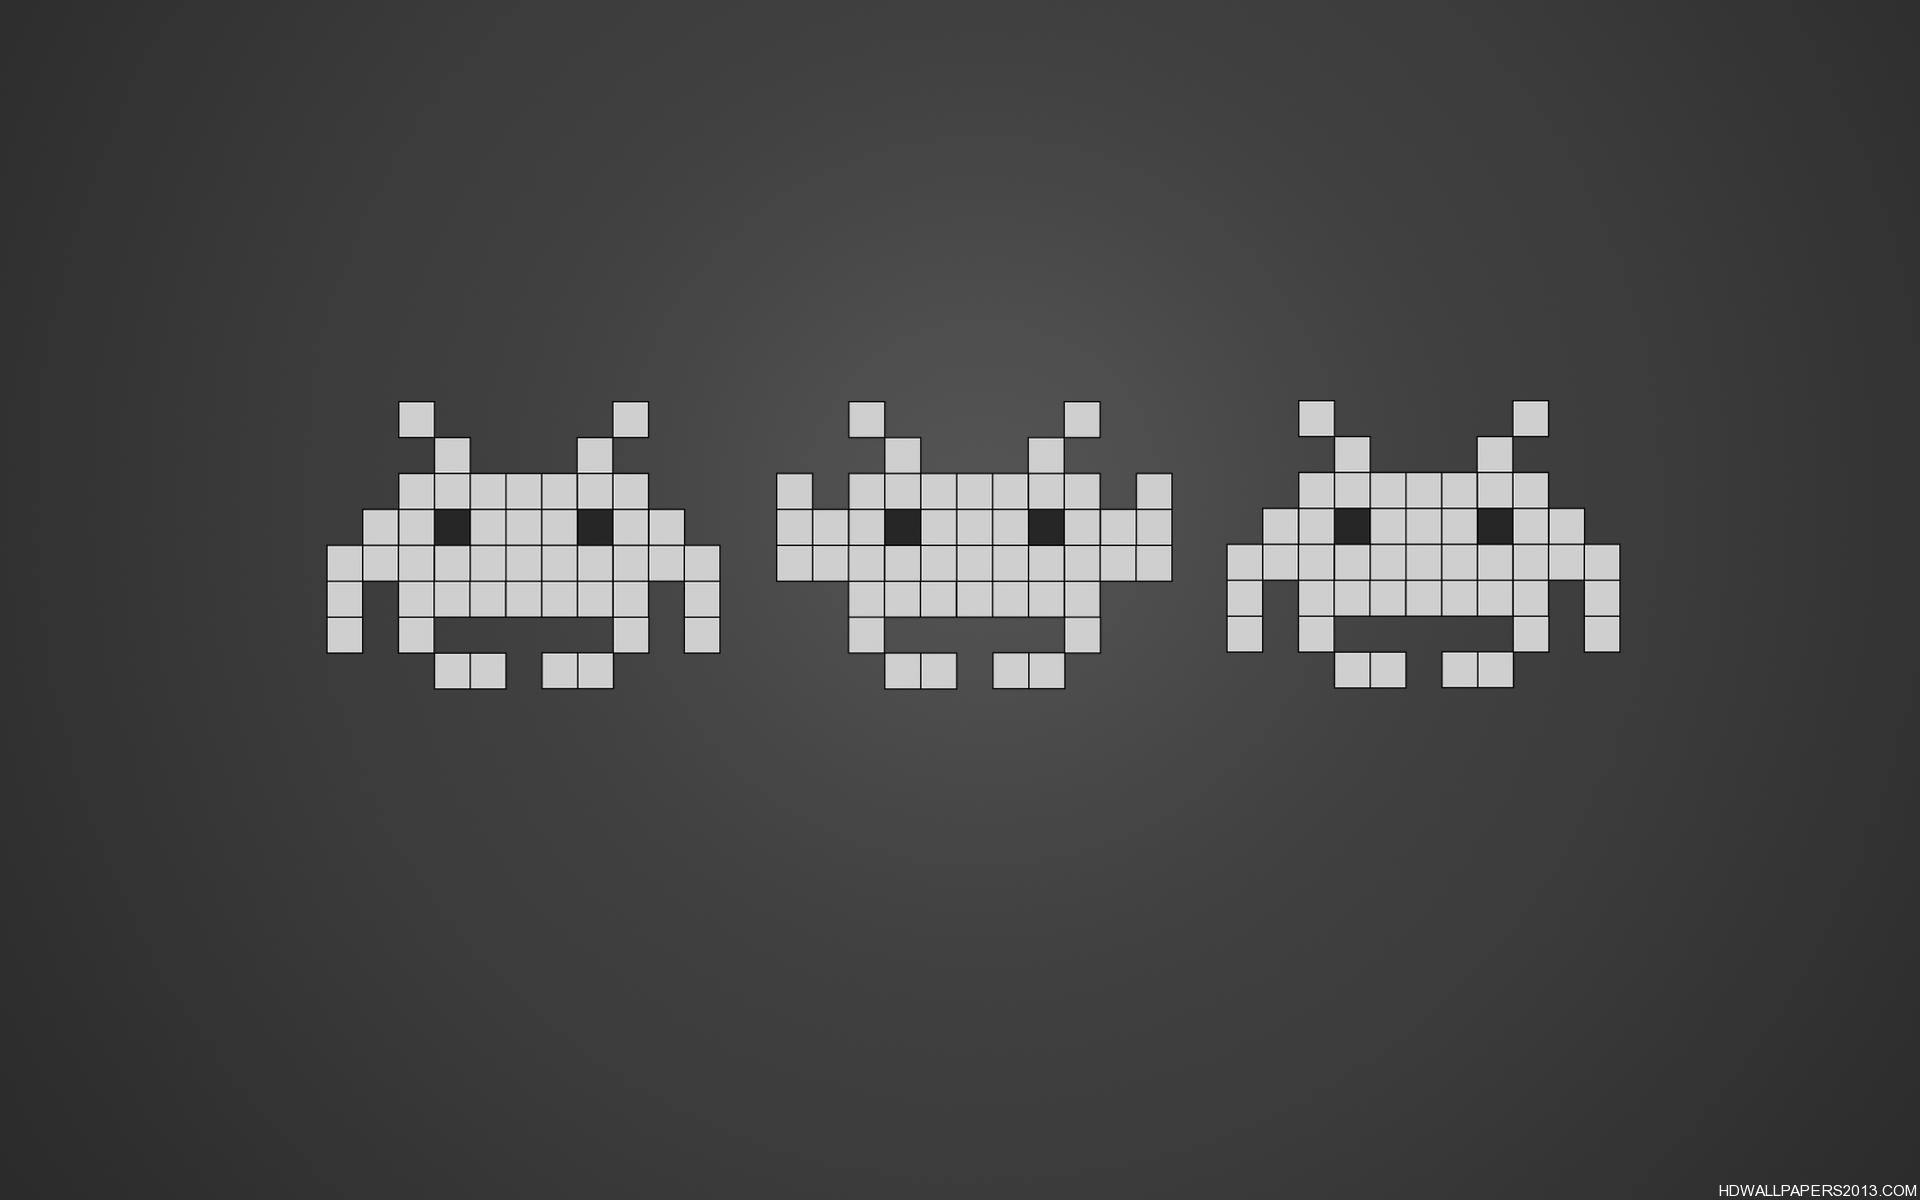 Space Invaders wallpapers